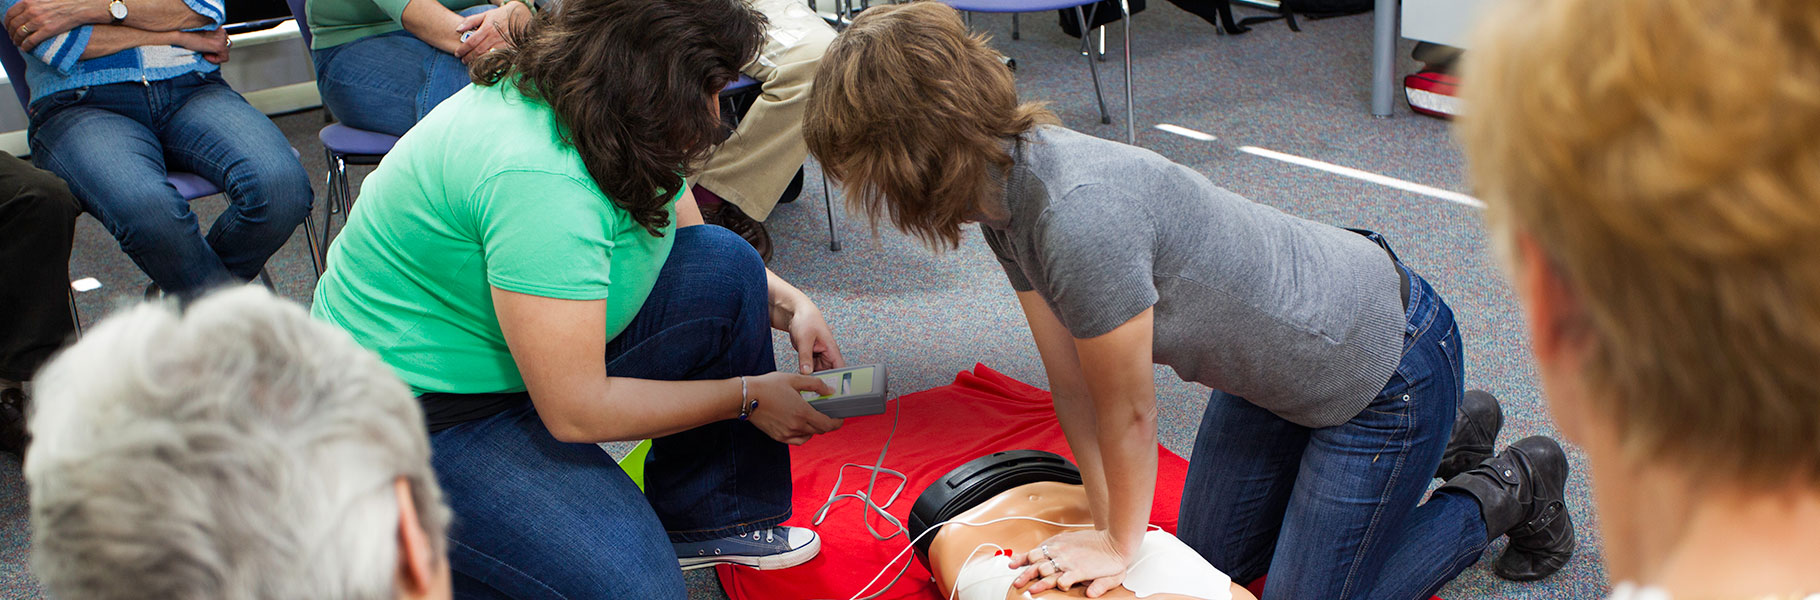 CPR class using dummy to administer aid